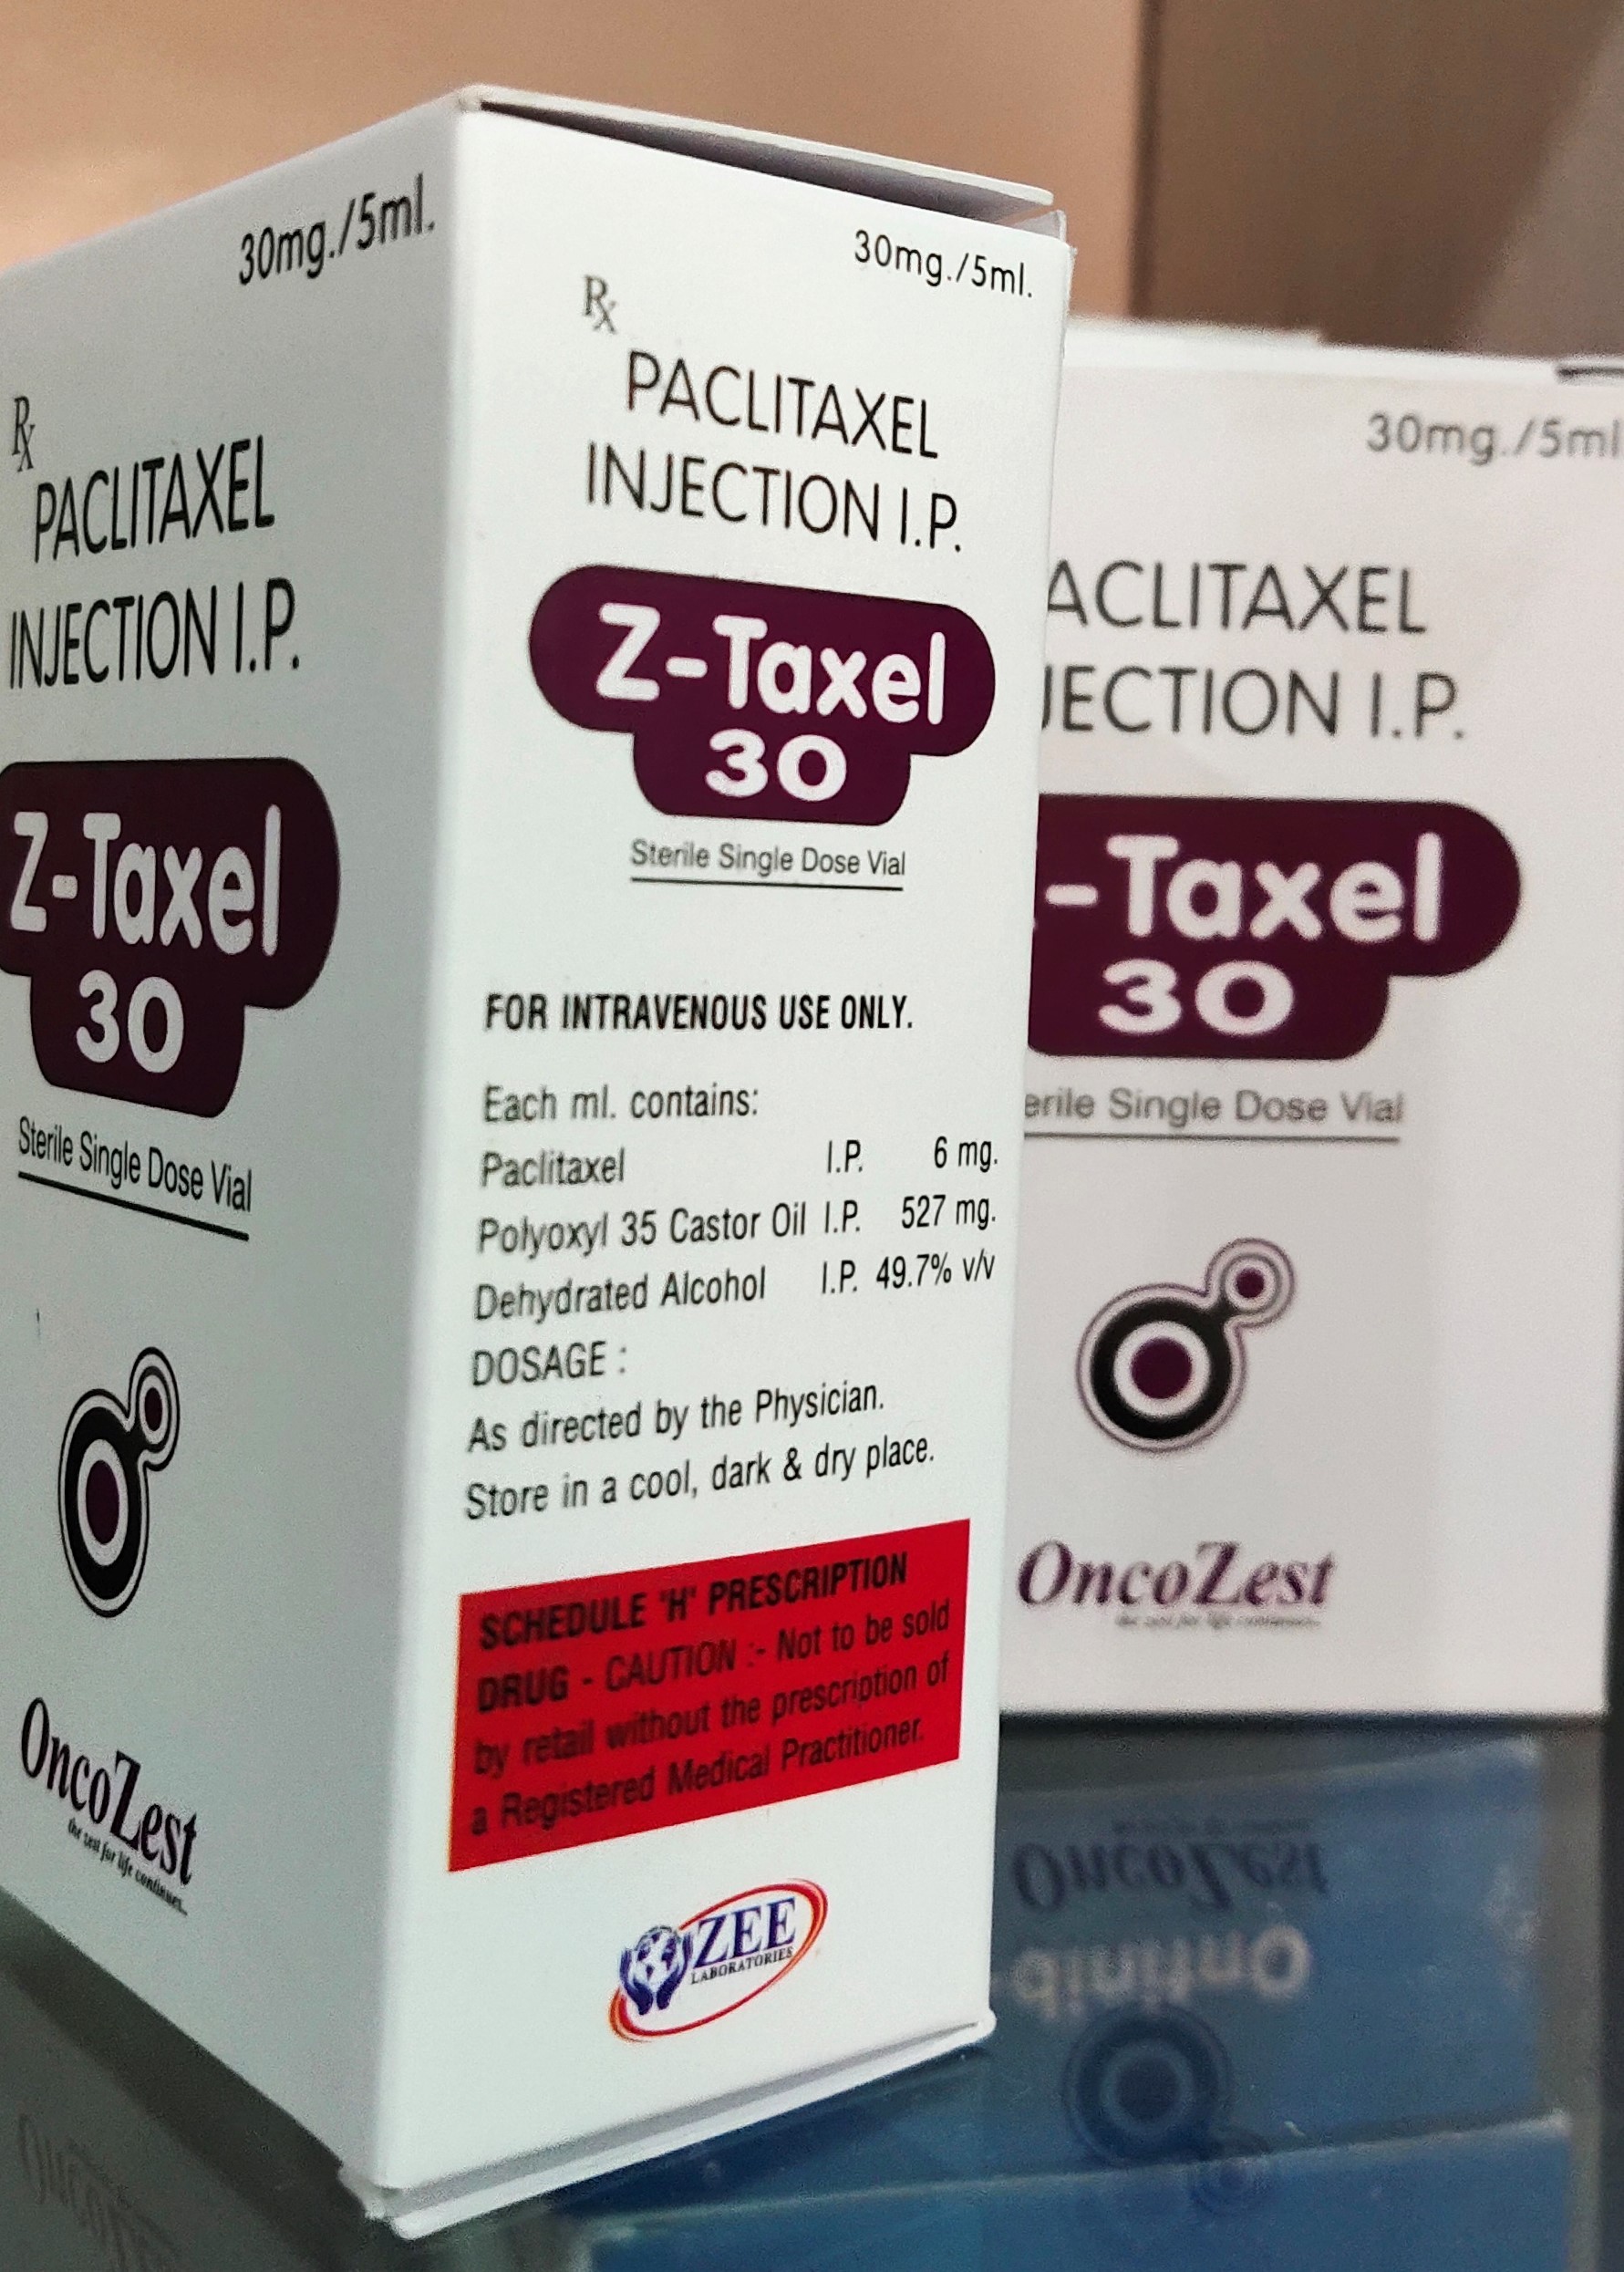 Paclitaxel Injection I.P